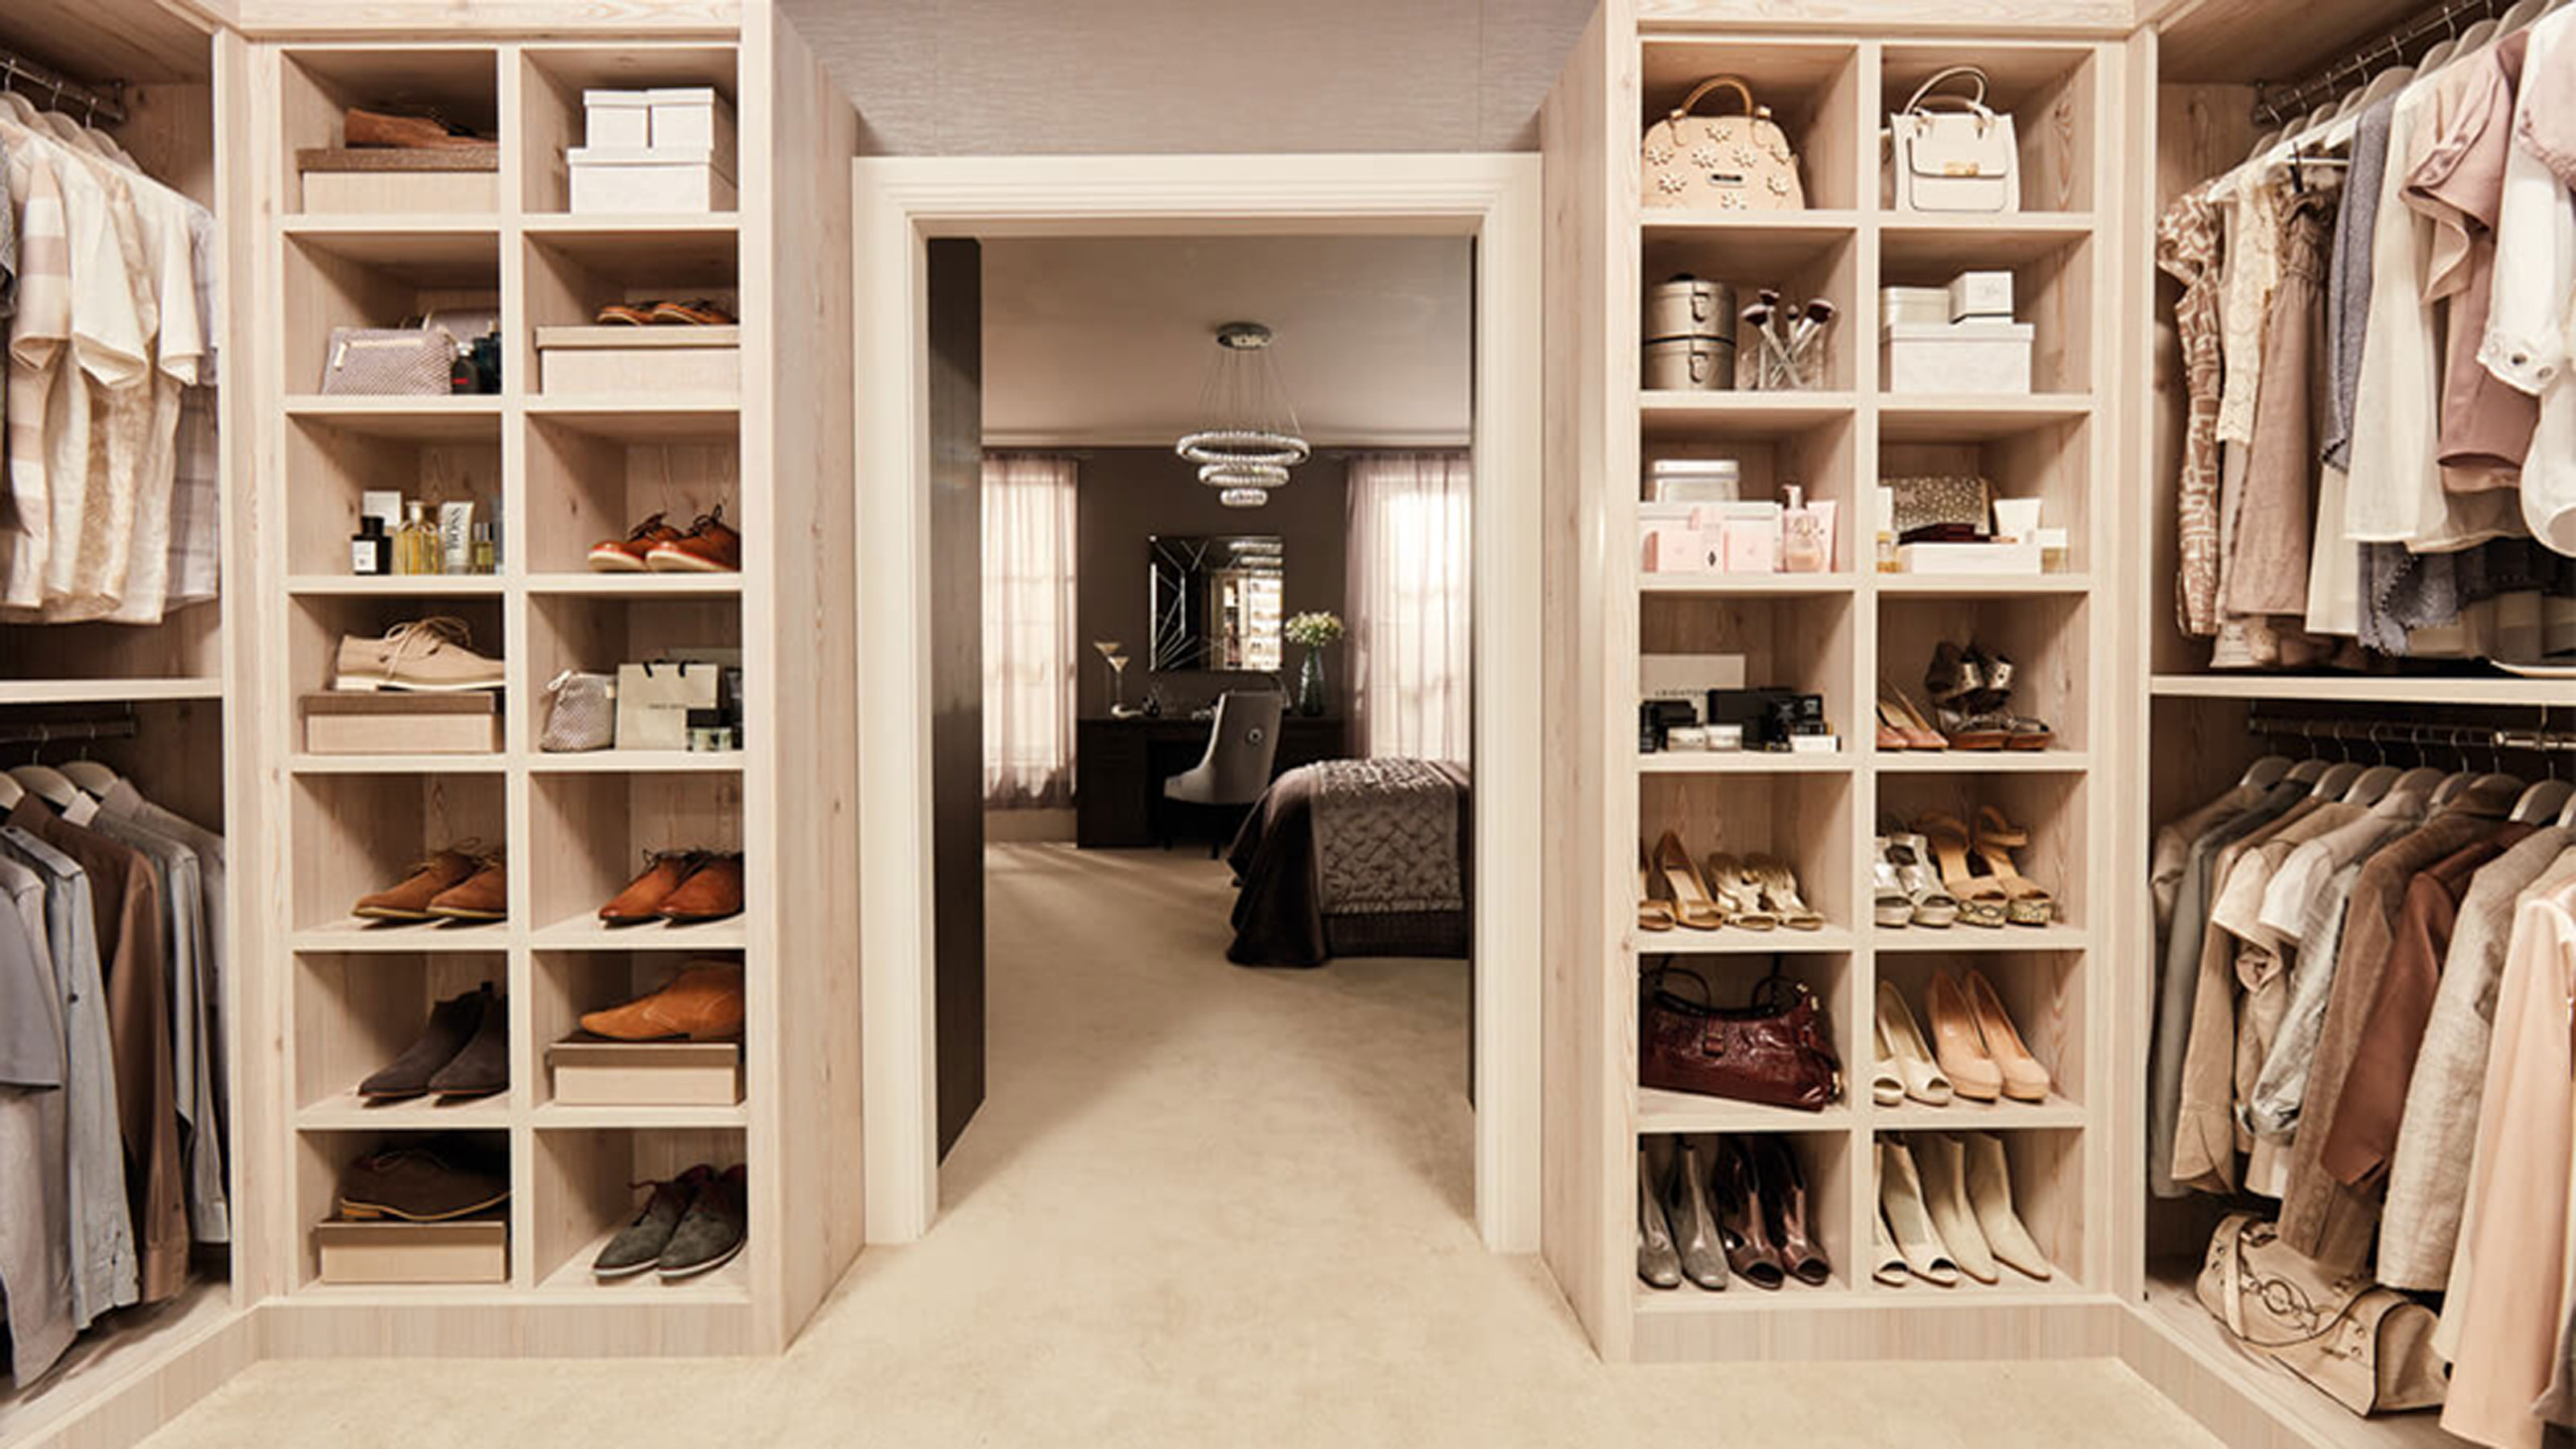 How do you lay out a walk-in closet? Expert organizers advise